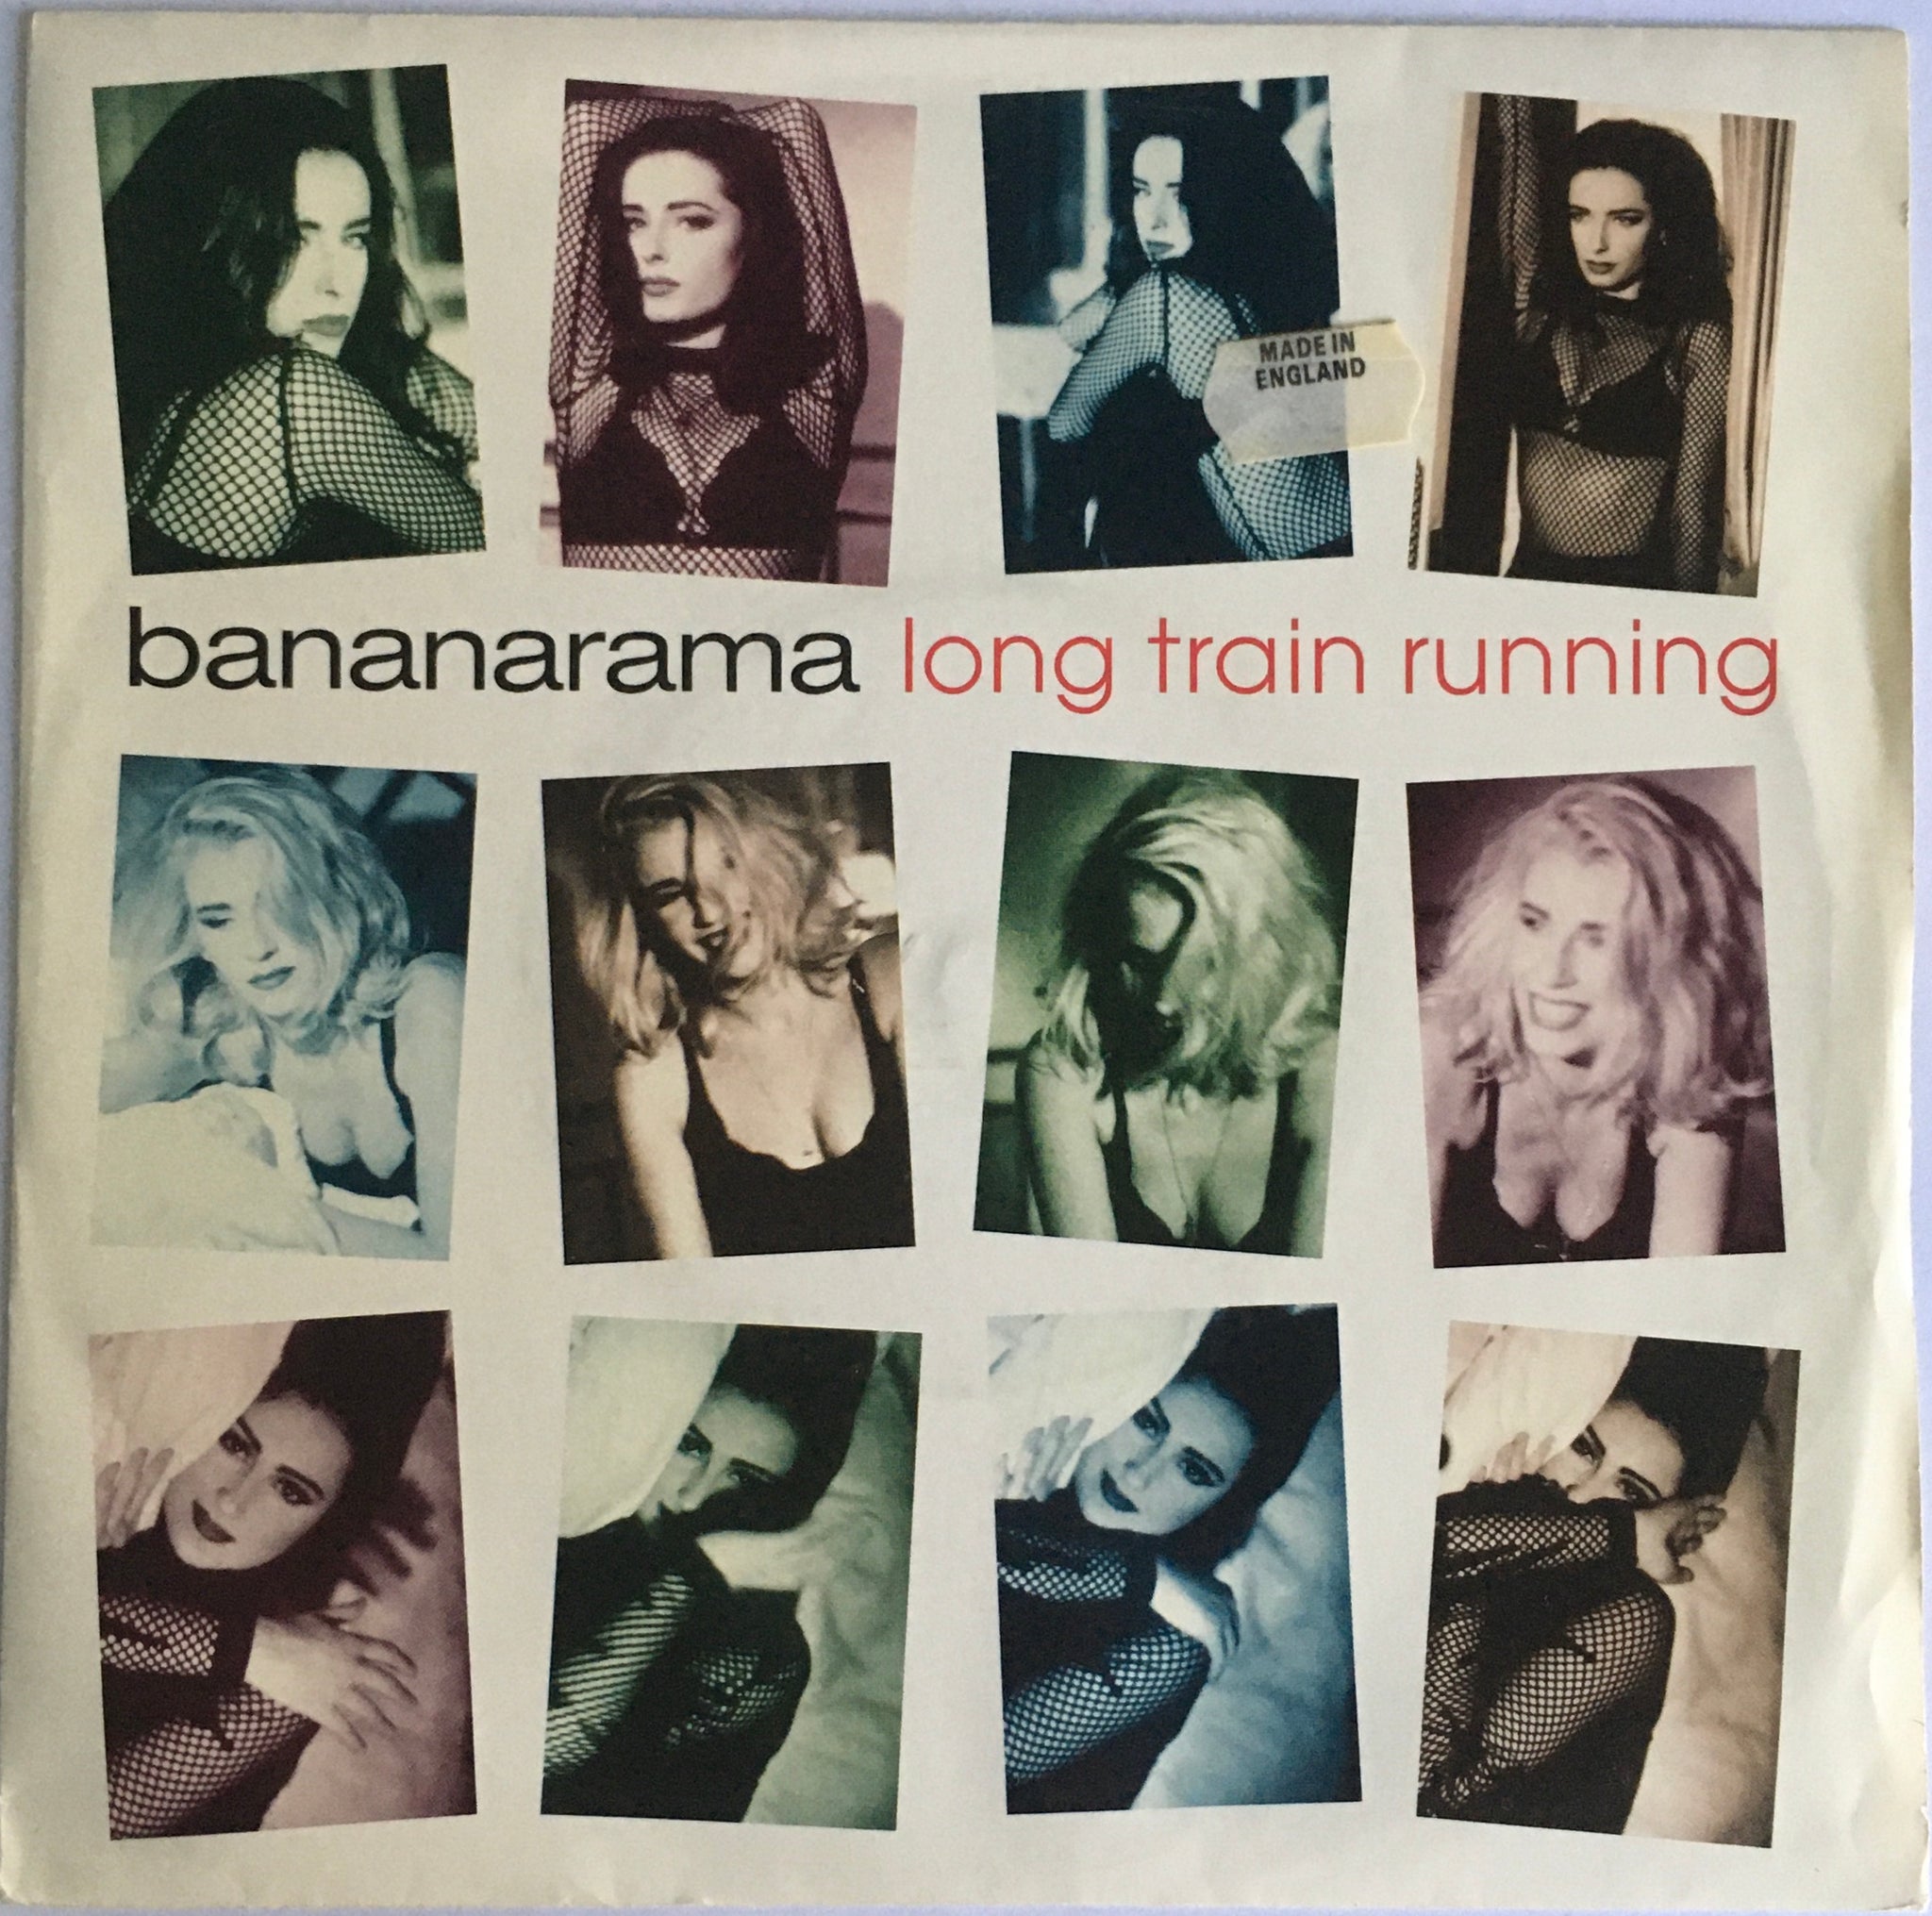 Bananarama, "Long Train Running" Import Single (1991). Front cover image. Pop, euro-synth, flamenco. A-side is a collaboration with Gipsy Kings.